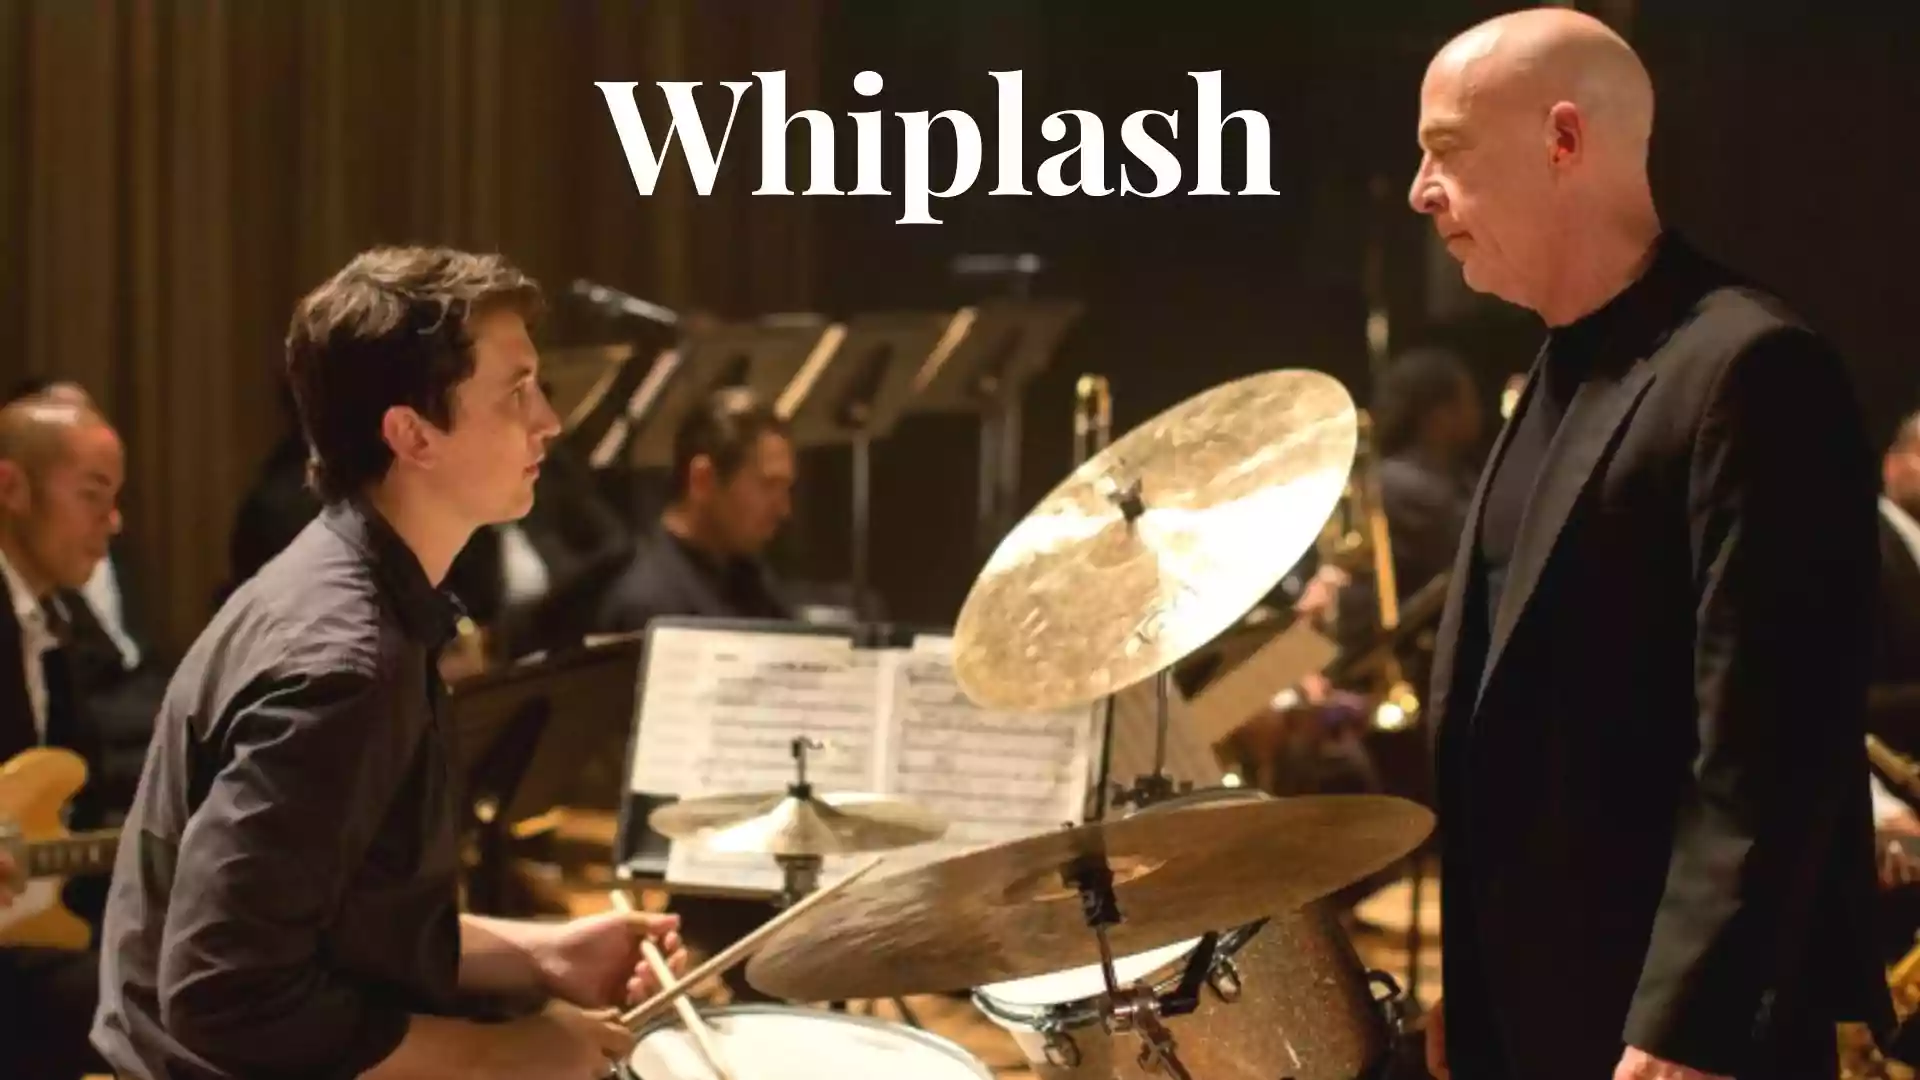 Whiplash Parents guide and Age Rating